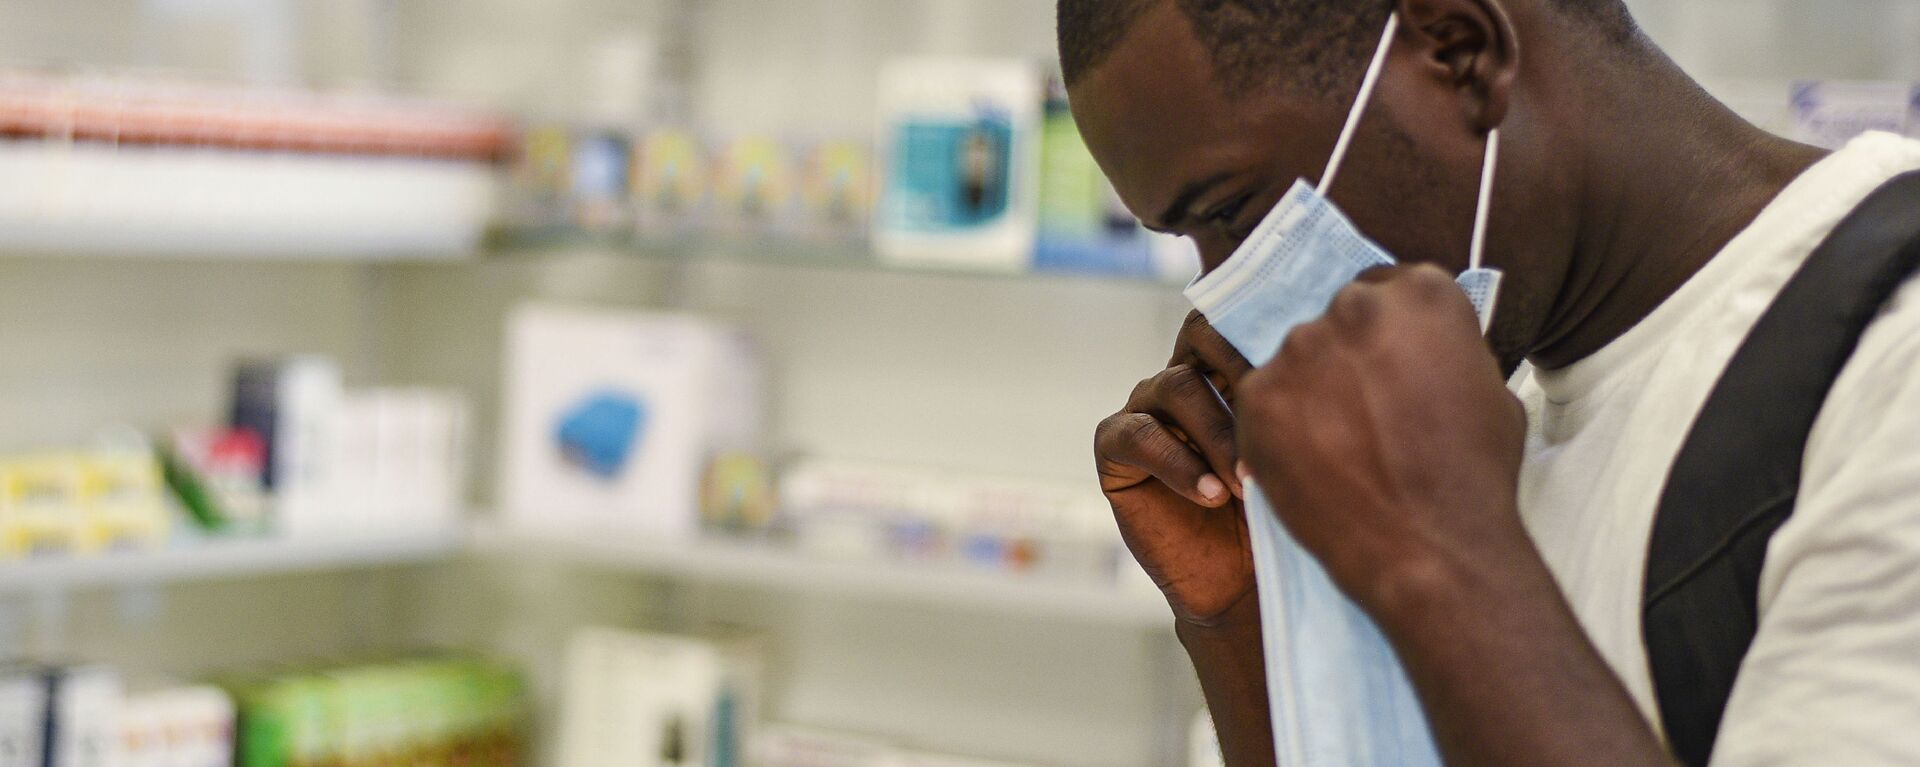 FILE — In this Feb. 6, 2020, file photo, a man tries on a face mask at a pharmacy in Kitwe, Zambia. Facing financial difficulties aggravated by the coronavirus pandemic, the southern African nation of Zambia seems to be headed for a default on debt owed to private investors - Sputnik International, 1920, 01.03.2021